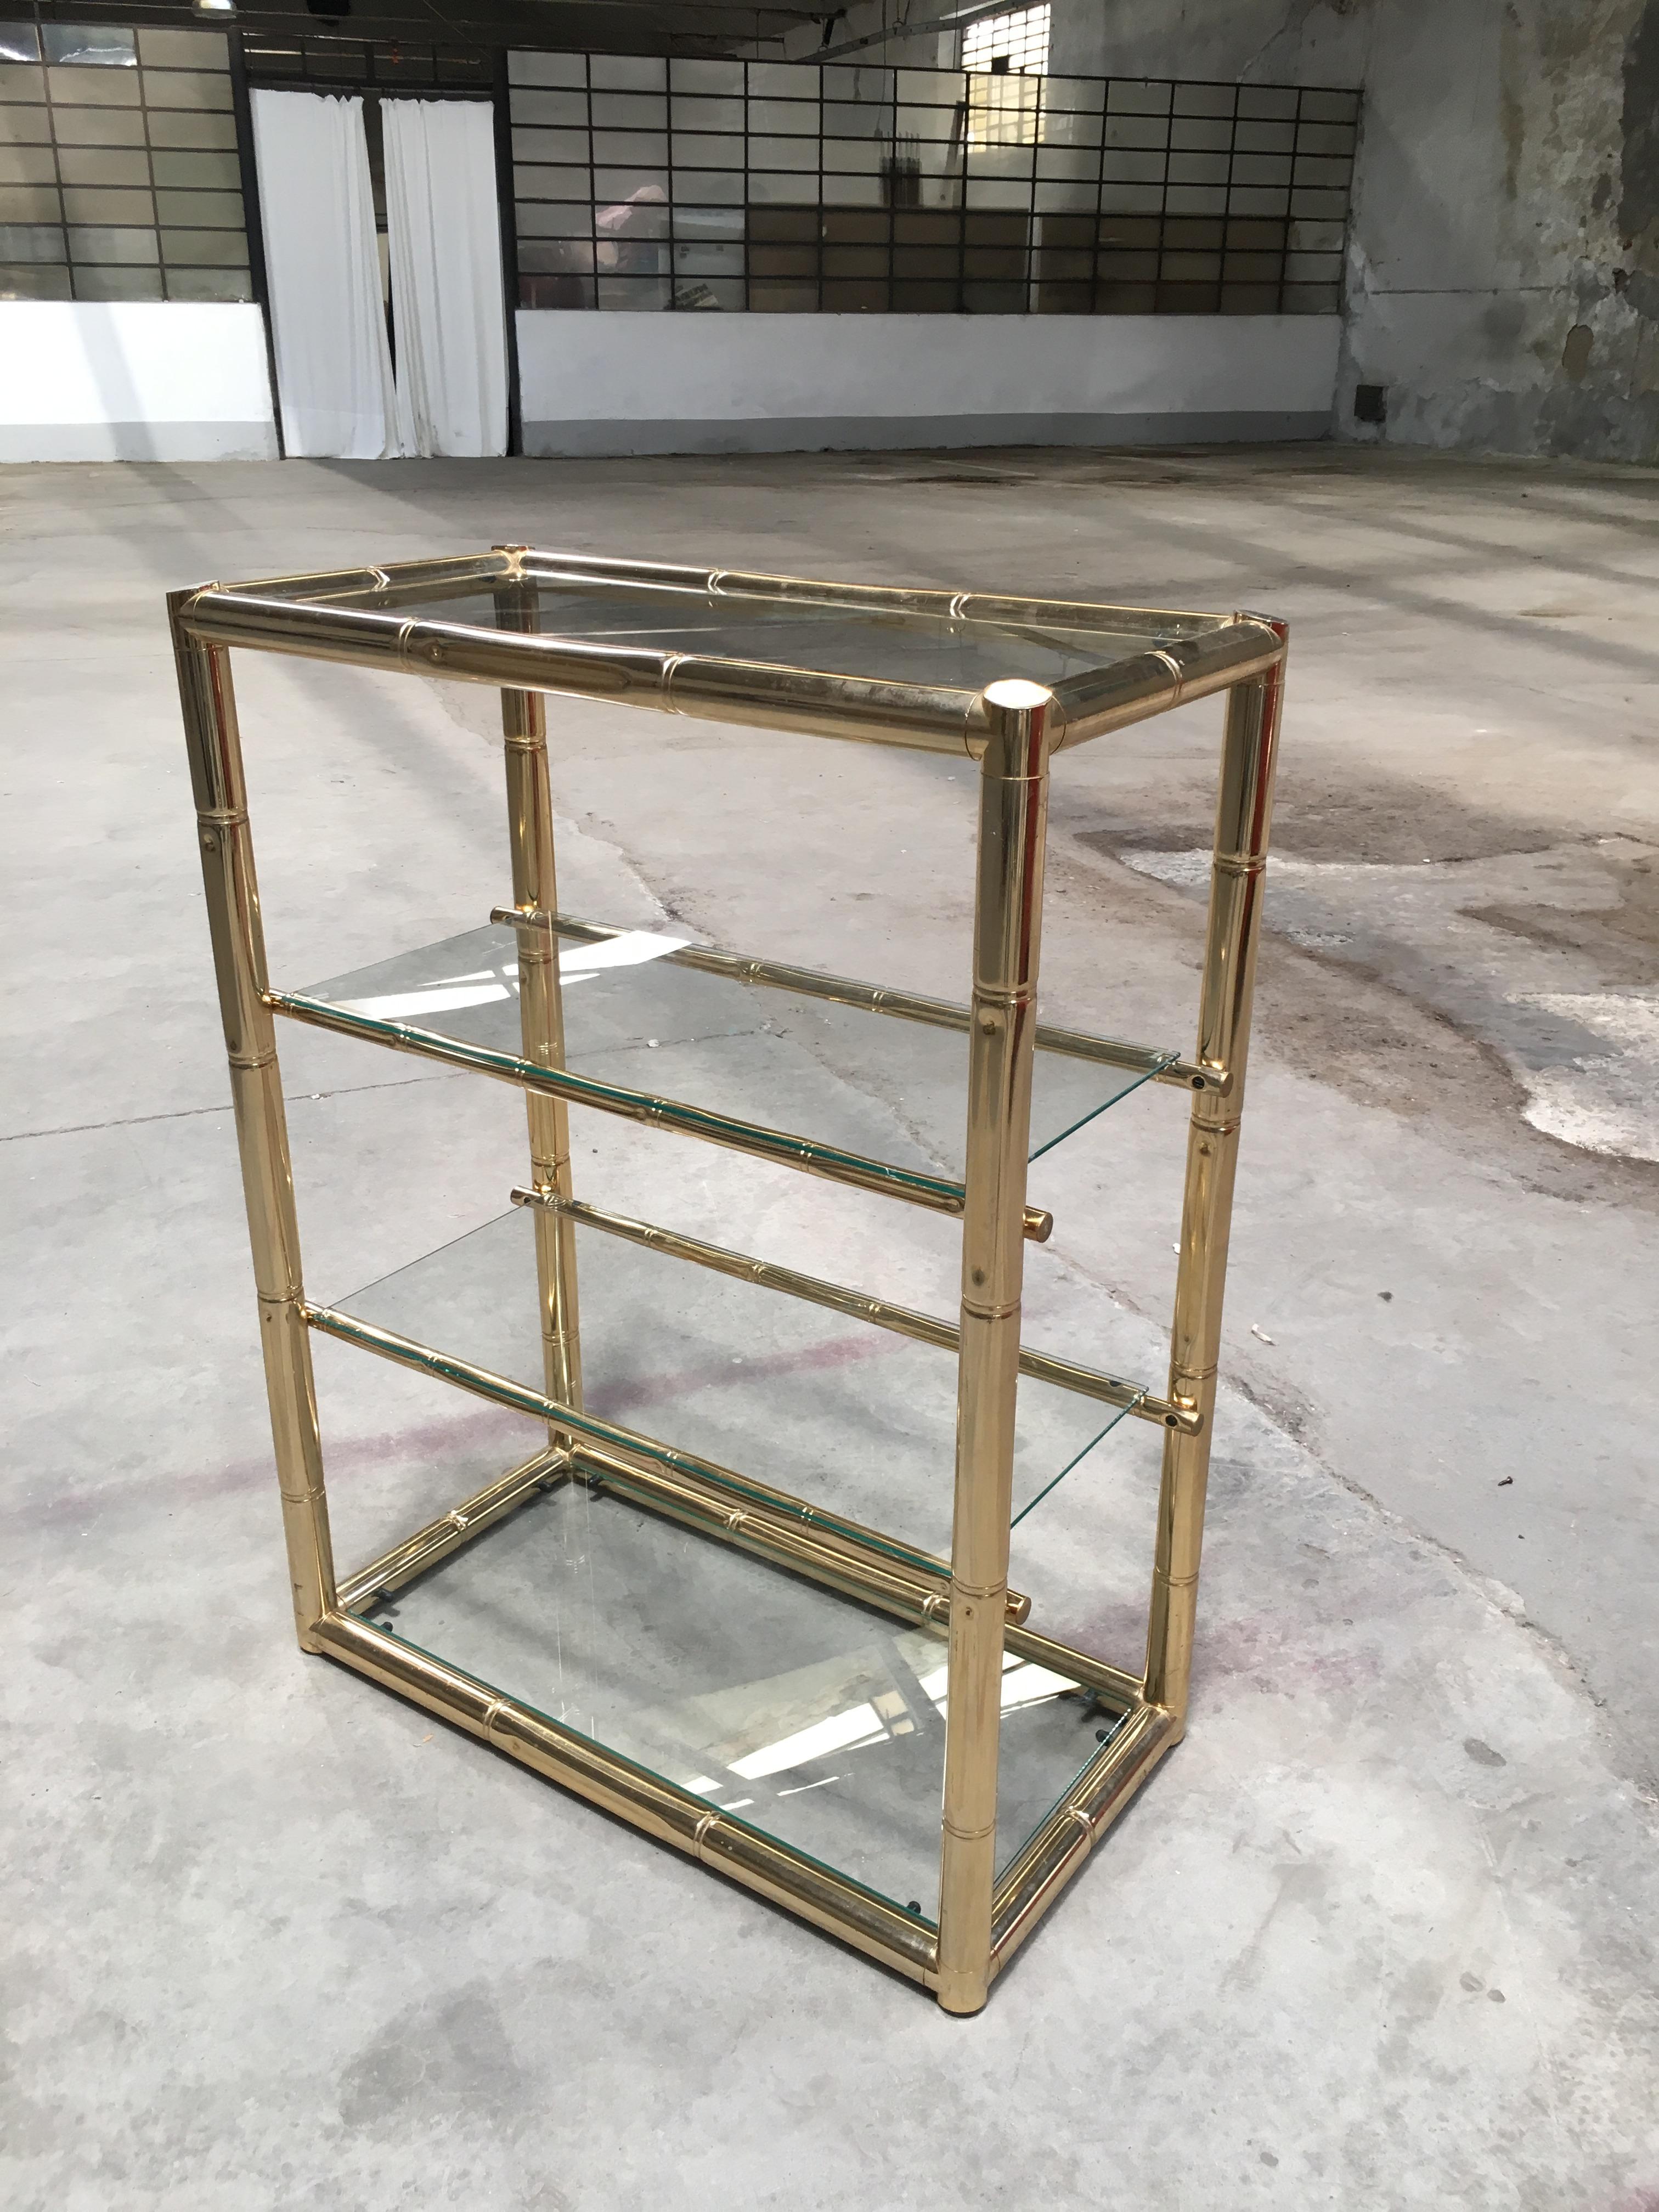 Mid-Century Modern four-tier Italian faux bamboo gilt metal and glass étagère from 1970s
This étagère could matches with a console table, a mirror, a freestanding rack as shown in the pictures. Prices on demand.